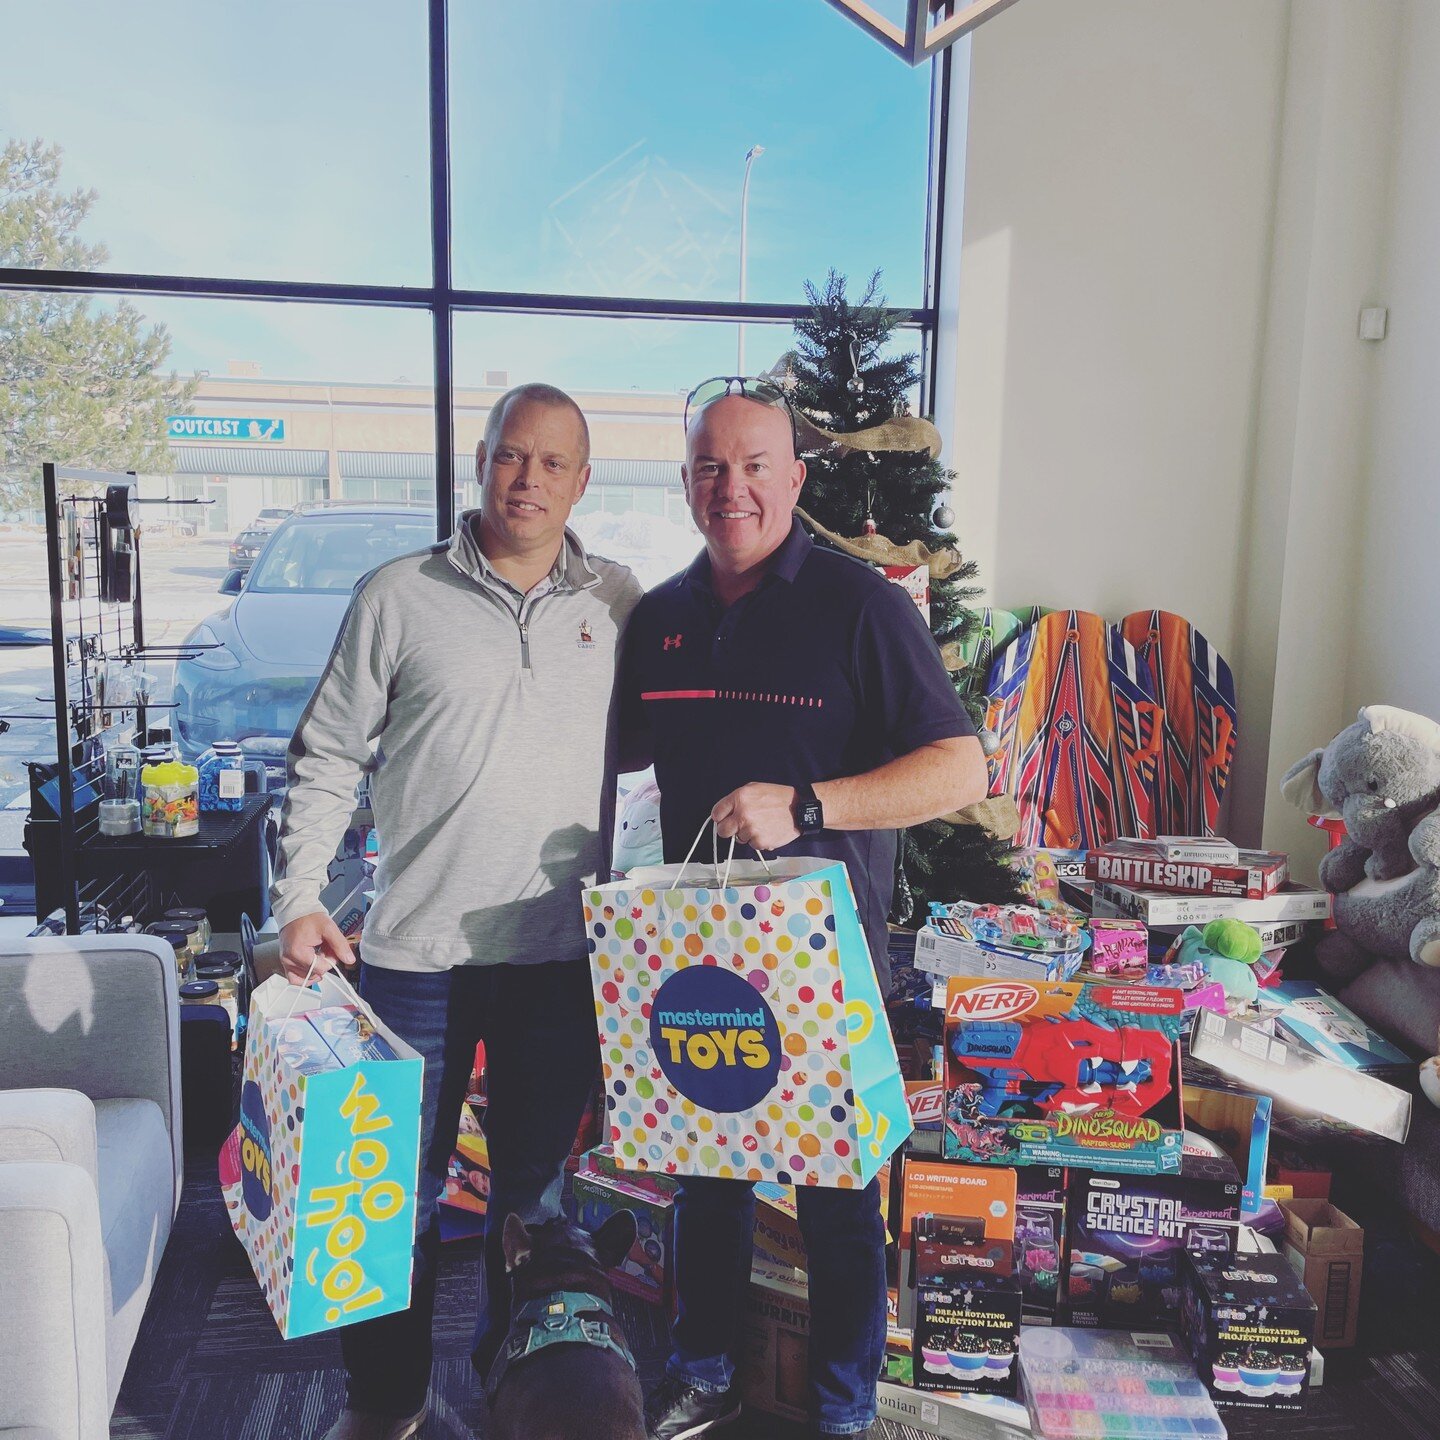 🎁✨ Making Spirits Bright with @wescoanixter and Tim Rees Generosity! 🌟🤝 This holiday season, we are overwhelmed with gratitude as Wesco steps up to spread joy and warmth to multiple families in need through our Christmas Toy Drive! 🎅🤶❤️

Thanks 